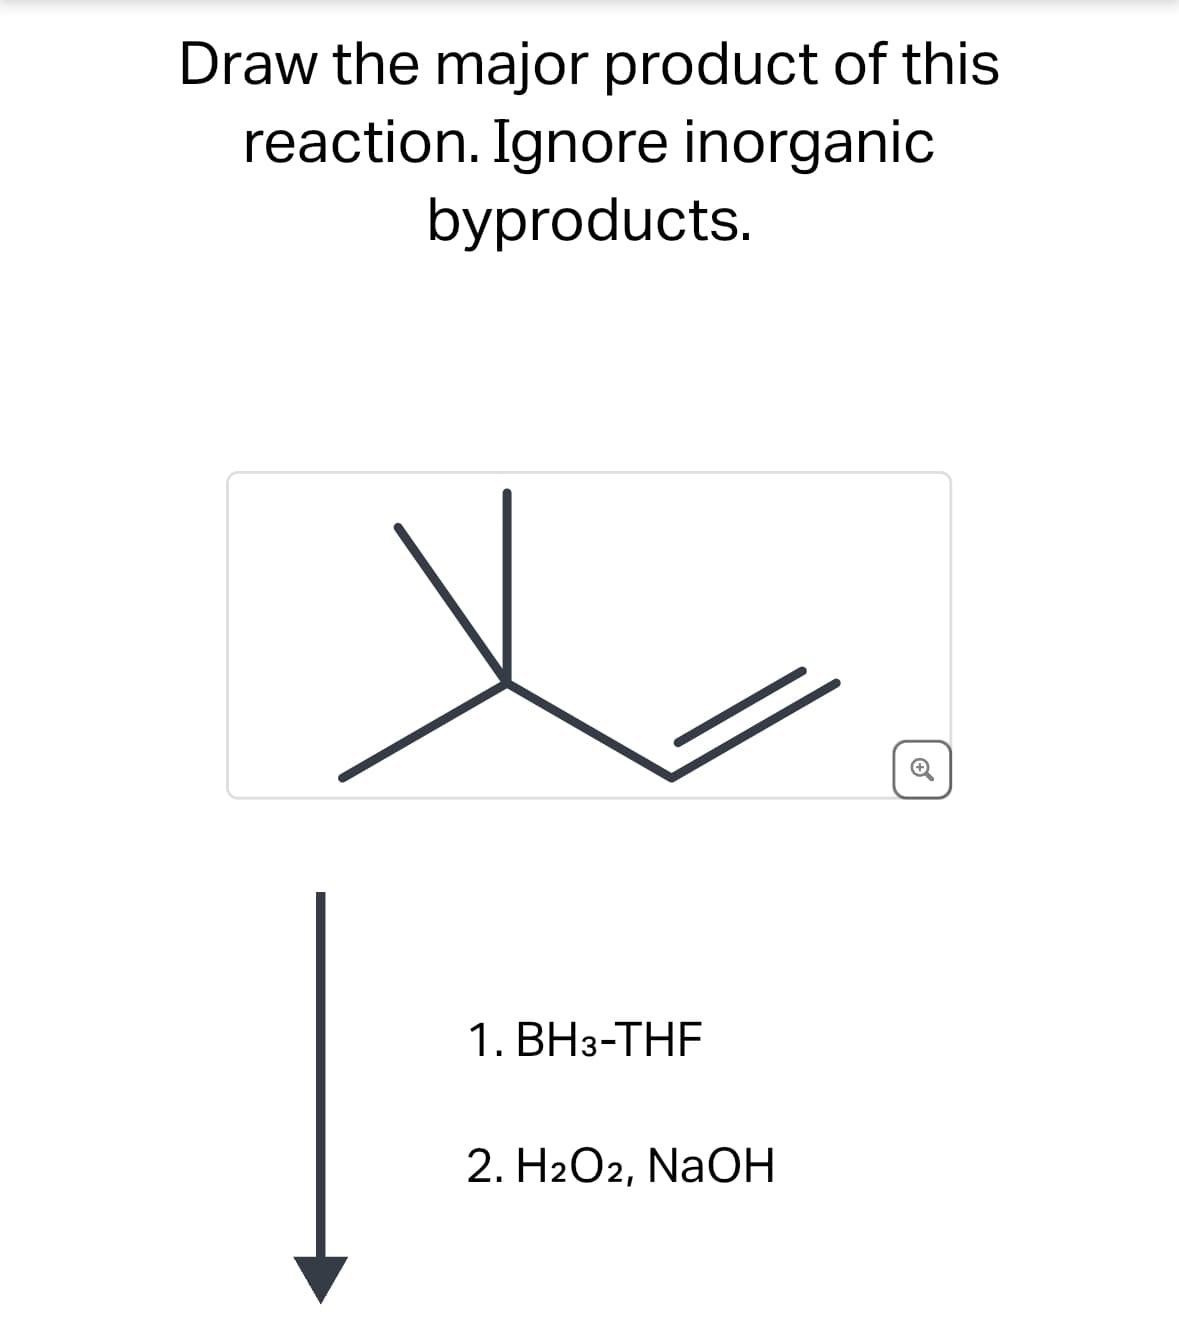 Draw the major product of this
reaction. Ignore inorganic
byproducts.
1. BH3-THF
2. H2O2, NaOH
C